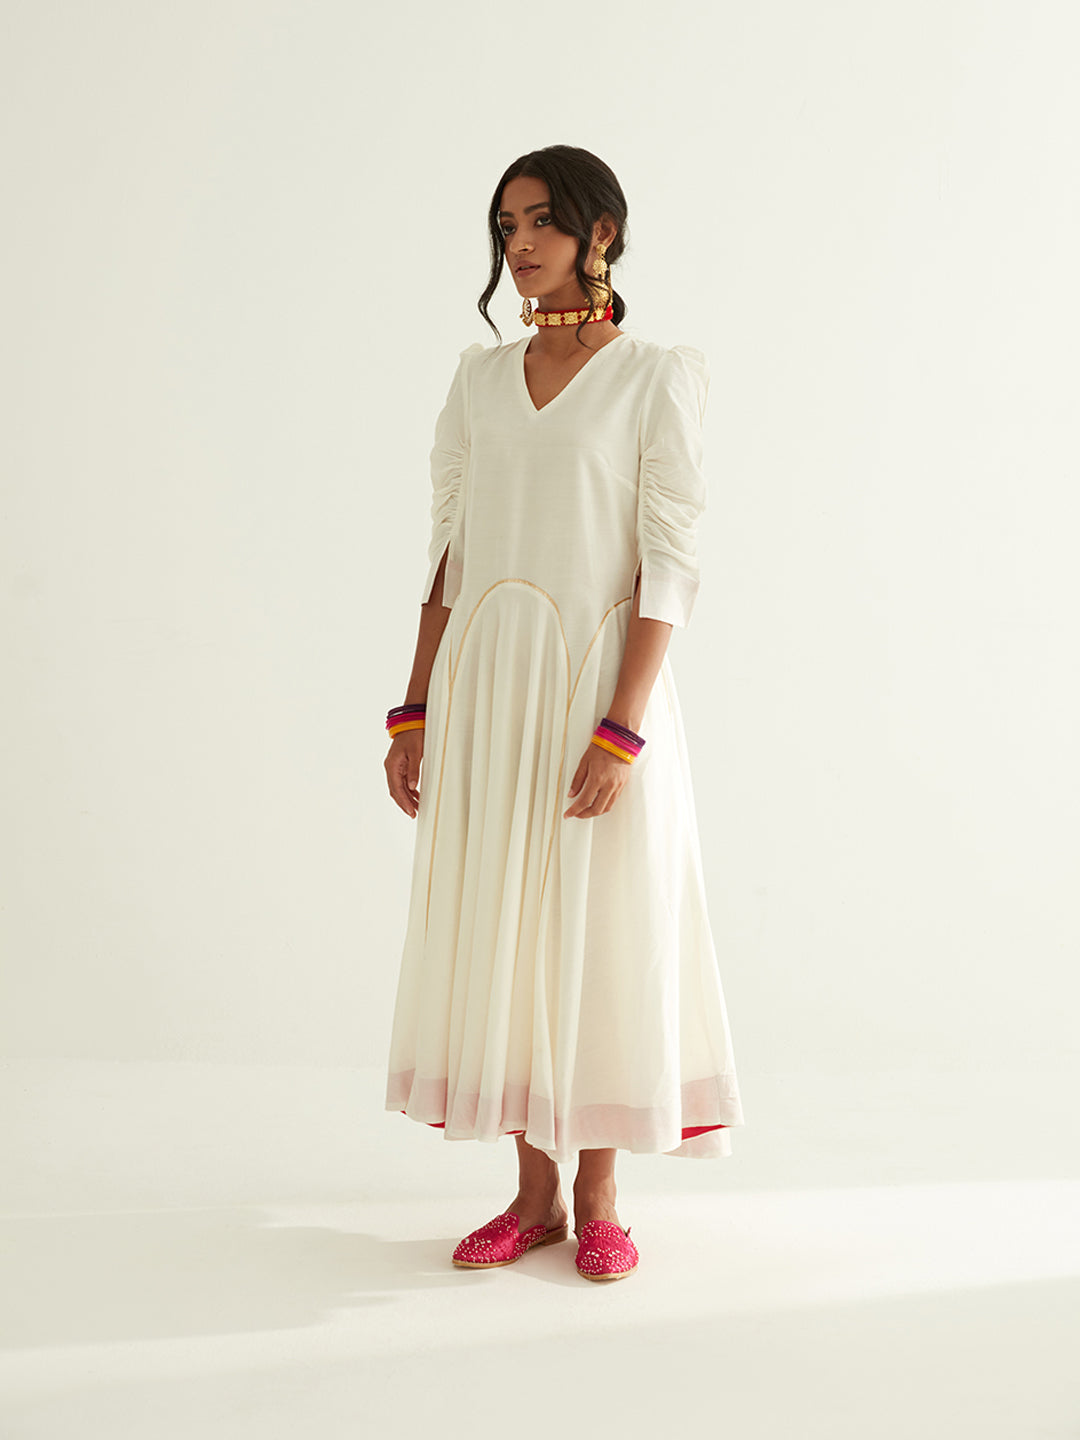 Circular panelled dress highlighted with Gota patti